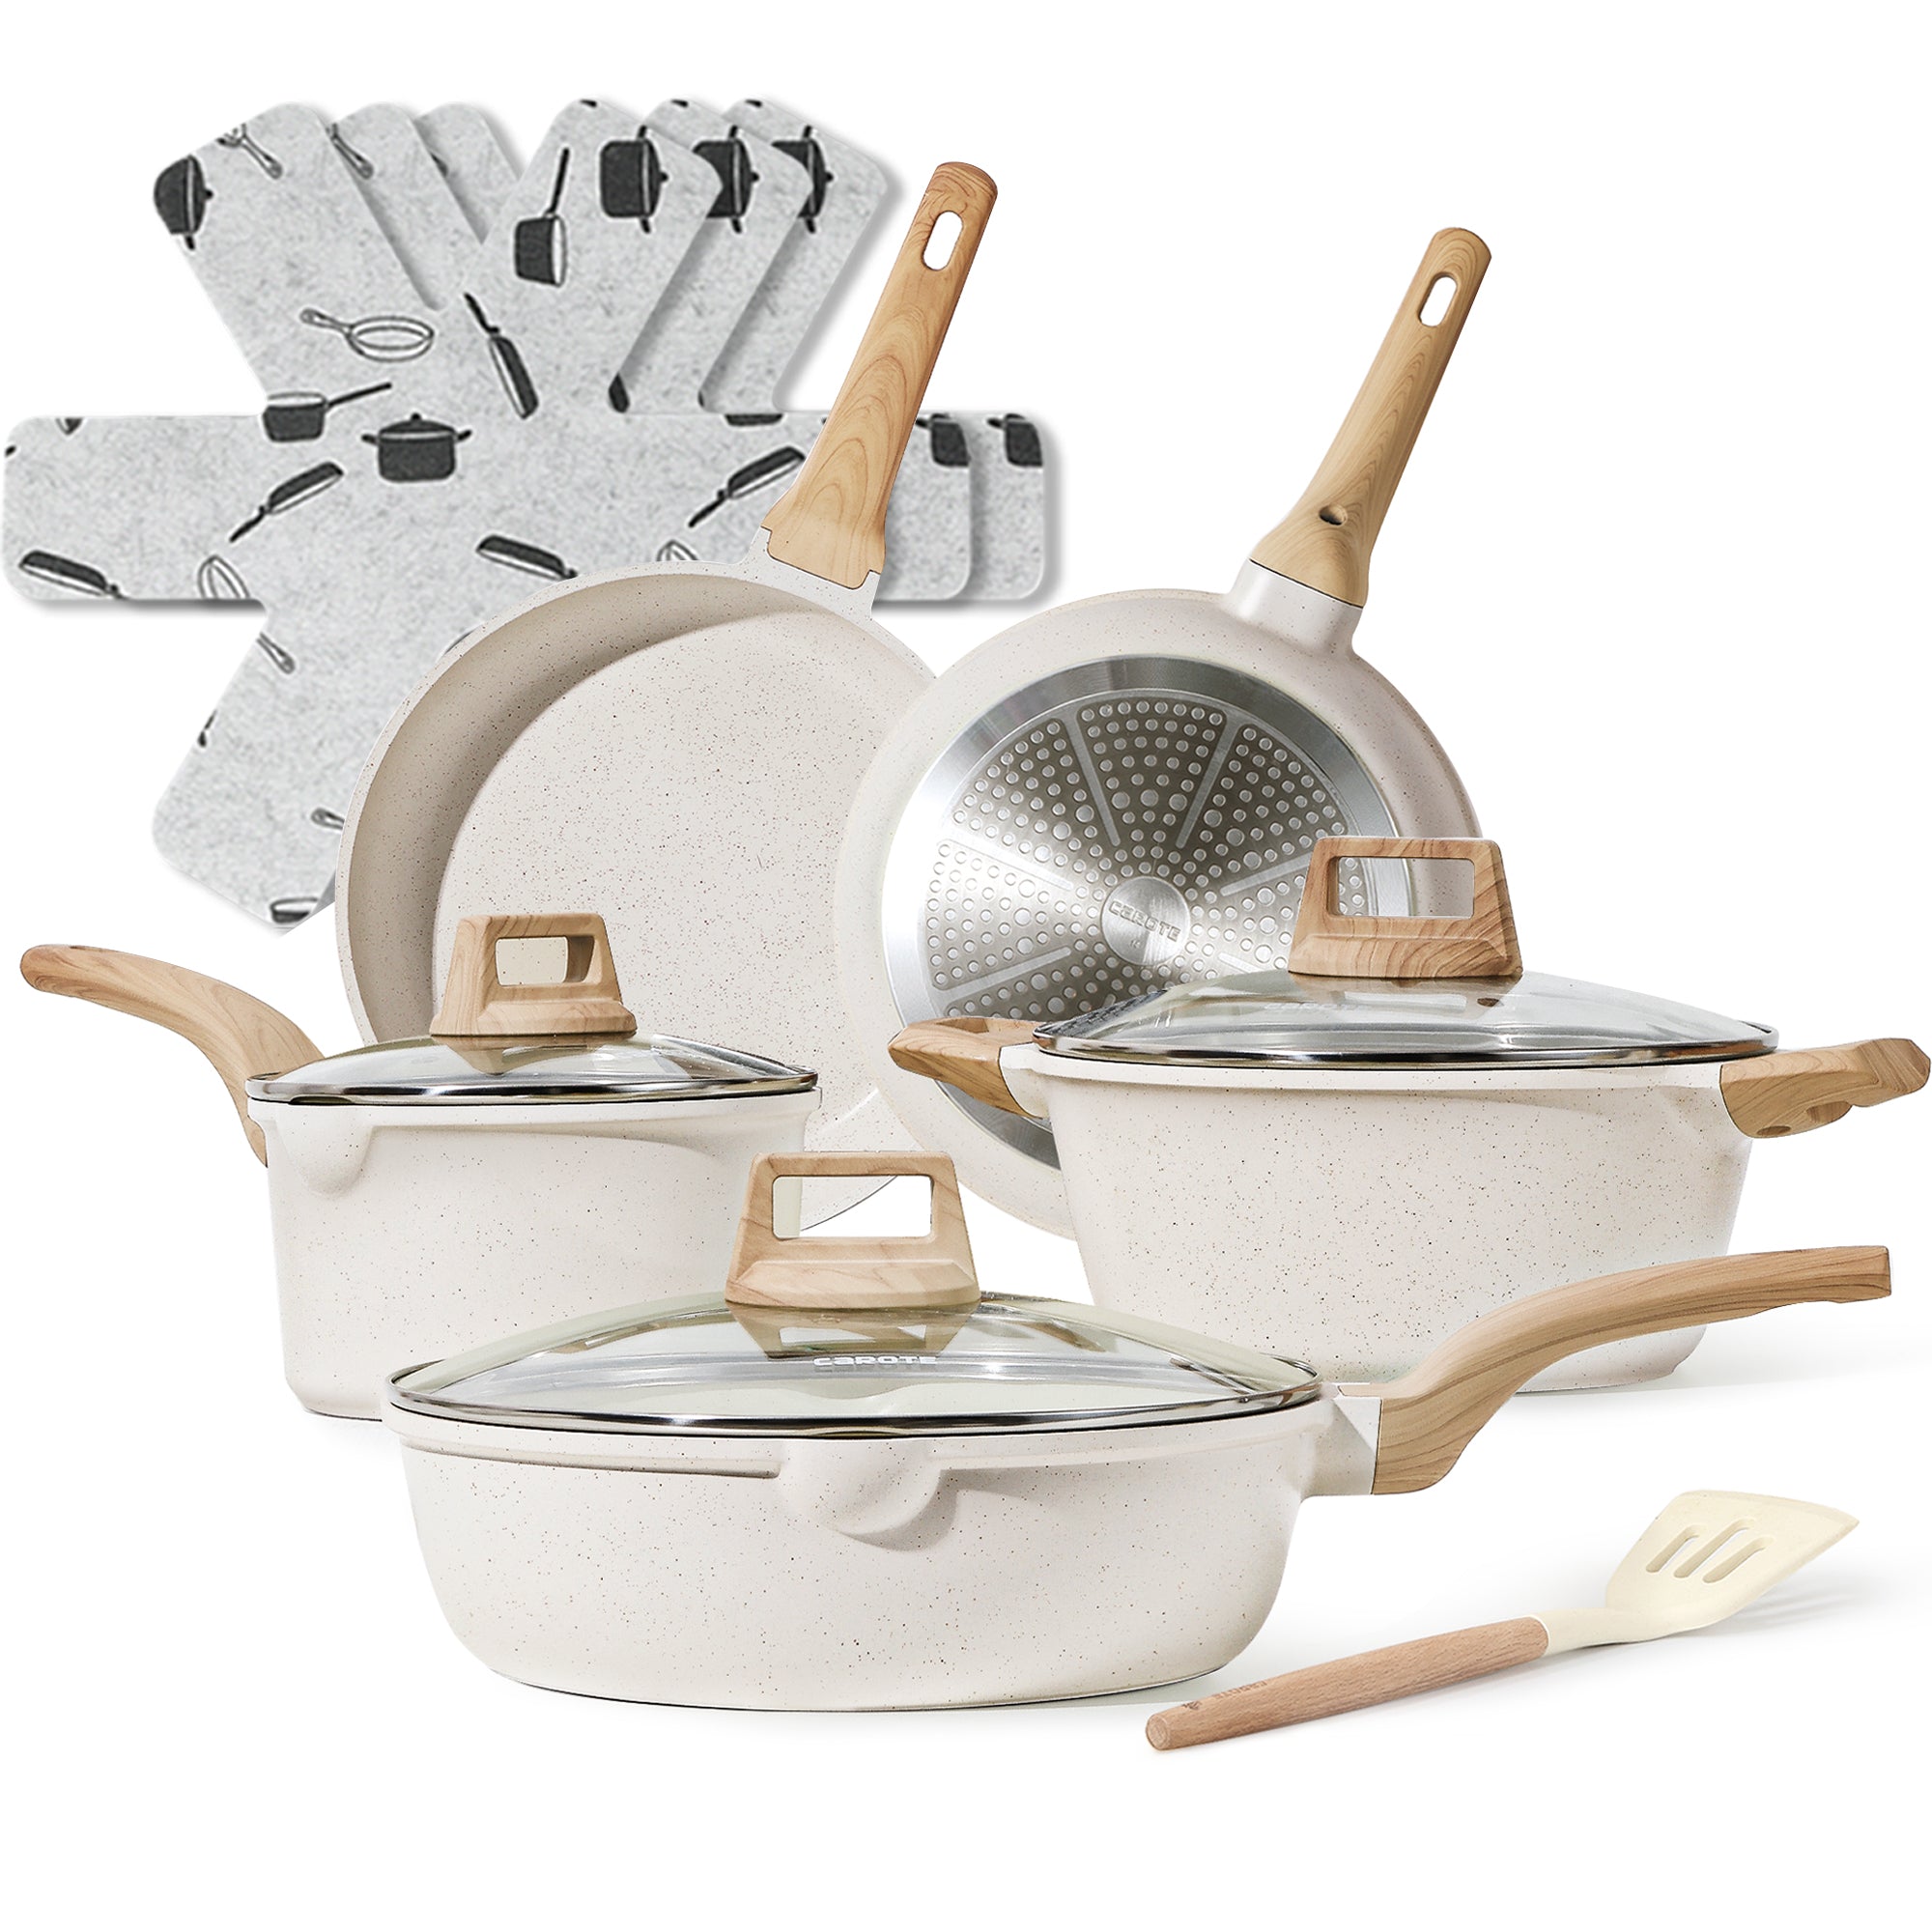 Carote 5 Pcs Granite Non Stick Pots and Pans Cookware Set with